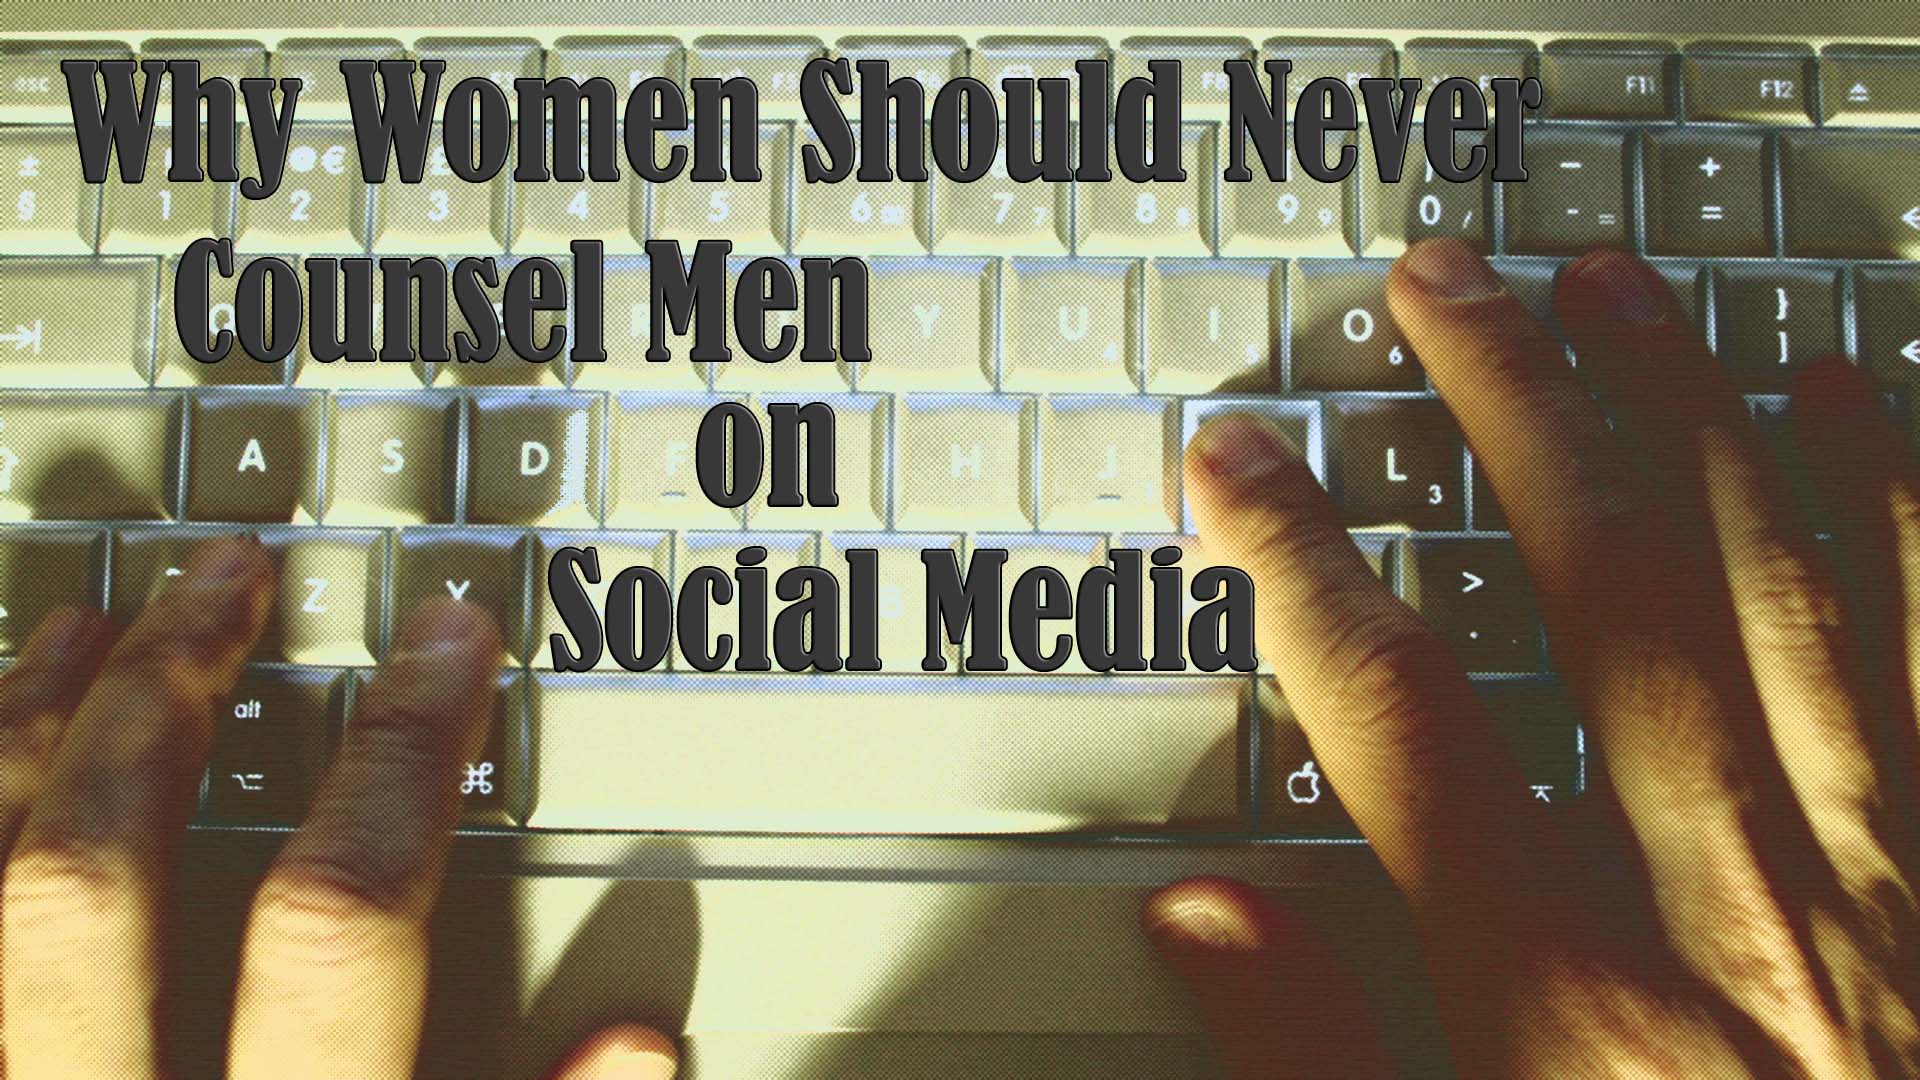 Why Women Should Never Counsel Men Privately on Social Media (or anywhere else)